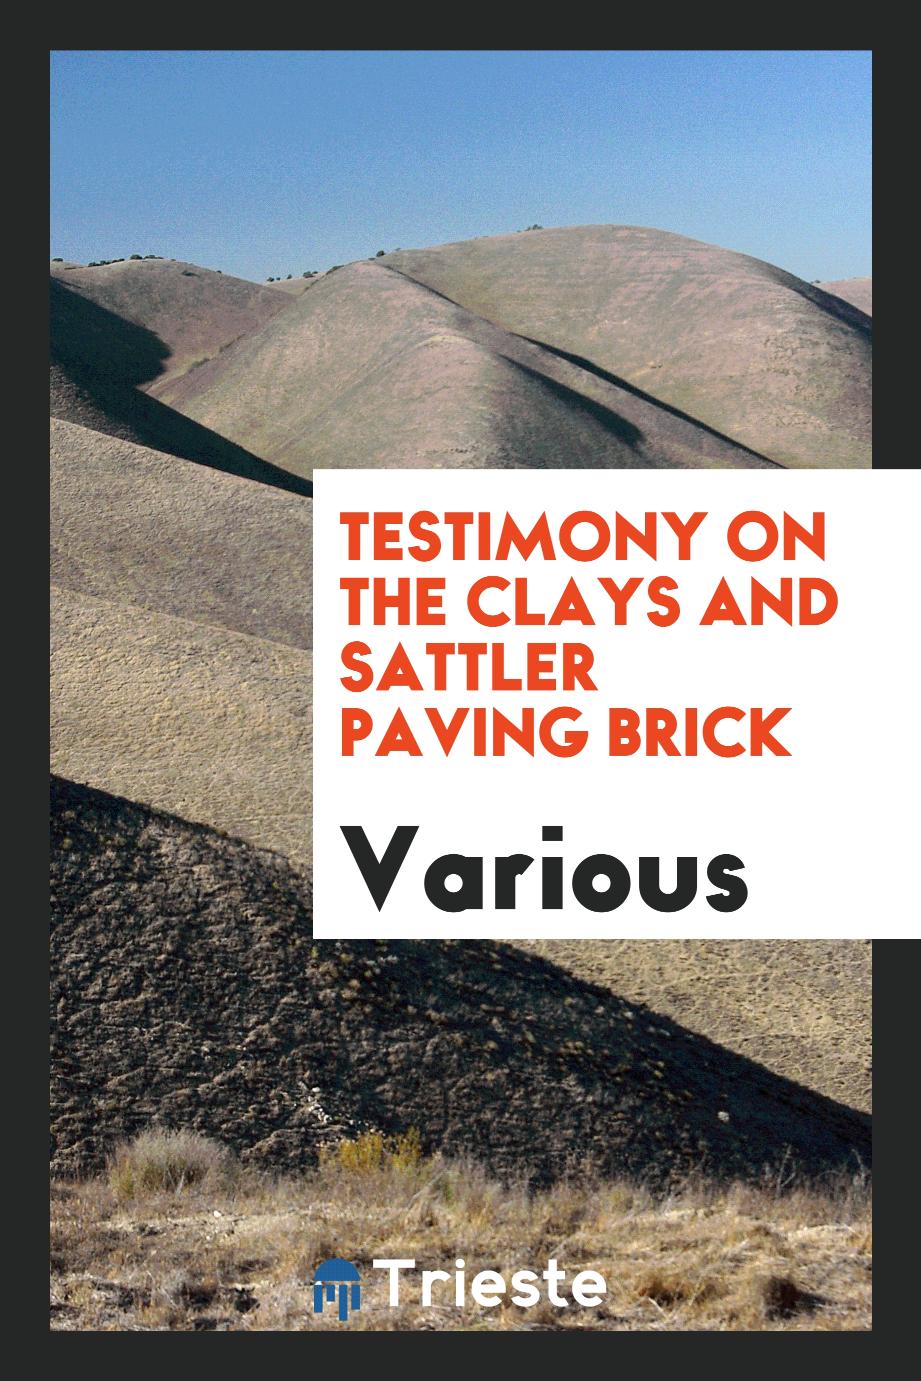 Testimony on the Clays and Sattler Paving Brick